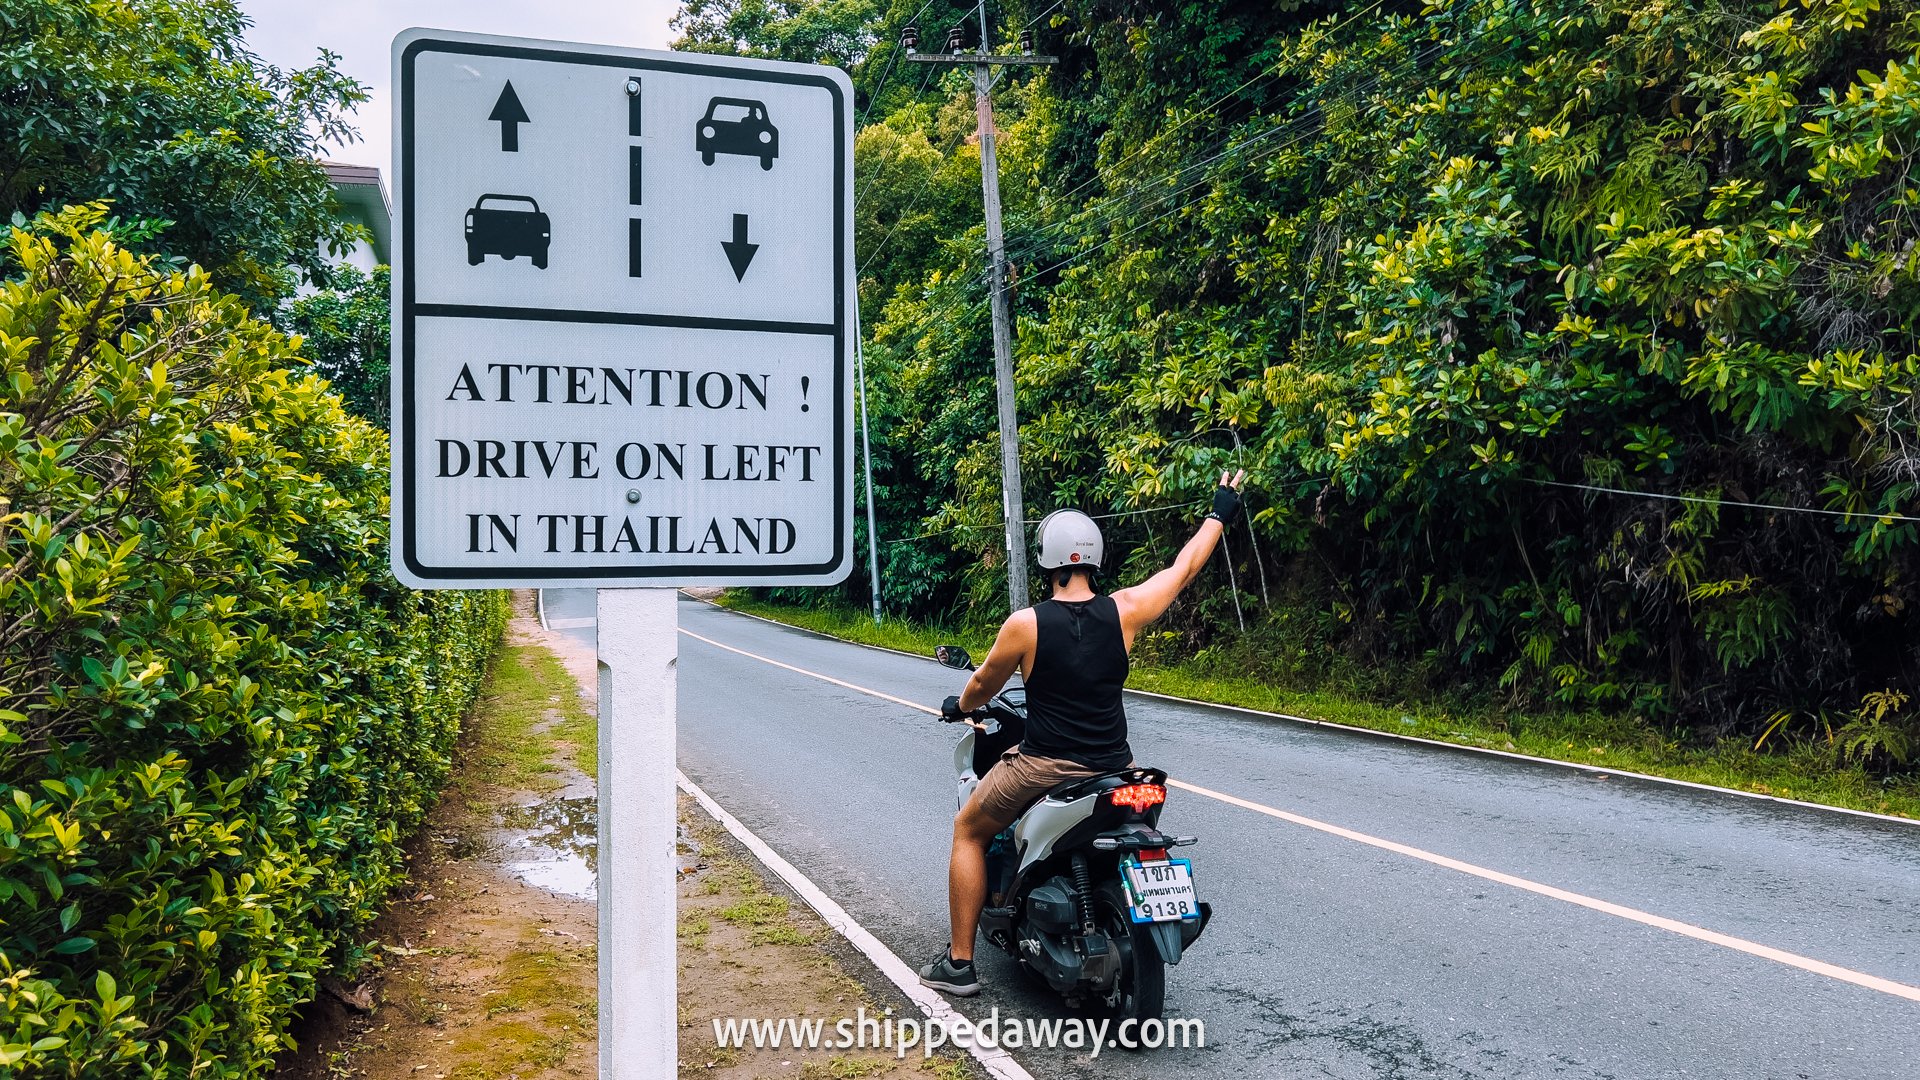 where to stay in Krabi, best places to stay in Krabi, best areas to stay in Krabi, best Krabi hotels, best hotels in Krabi, best resorts in Krabi, best Krabi resorts, best Krabi hostels, budget stays in Krabi, Krabi budget accommodation, rent a scooter in Krabi, Thailand